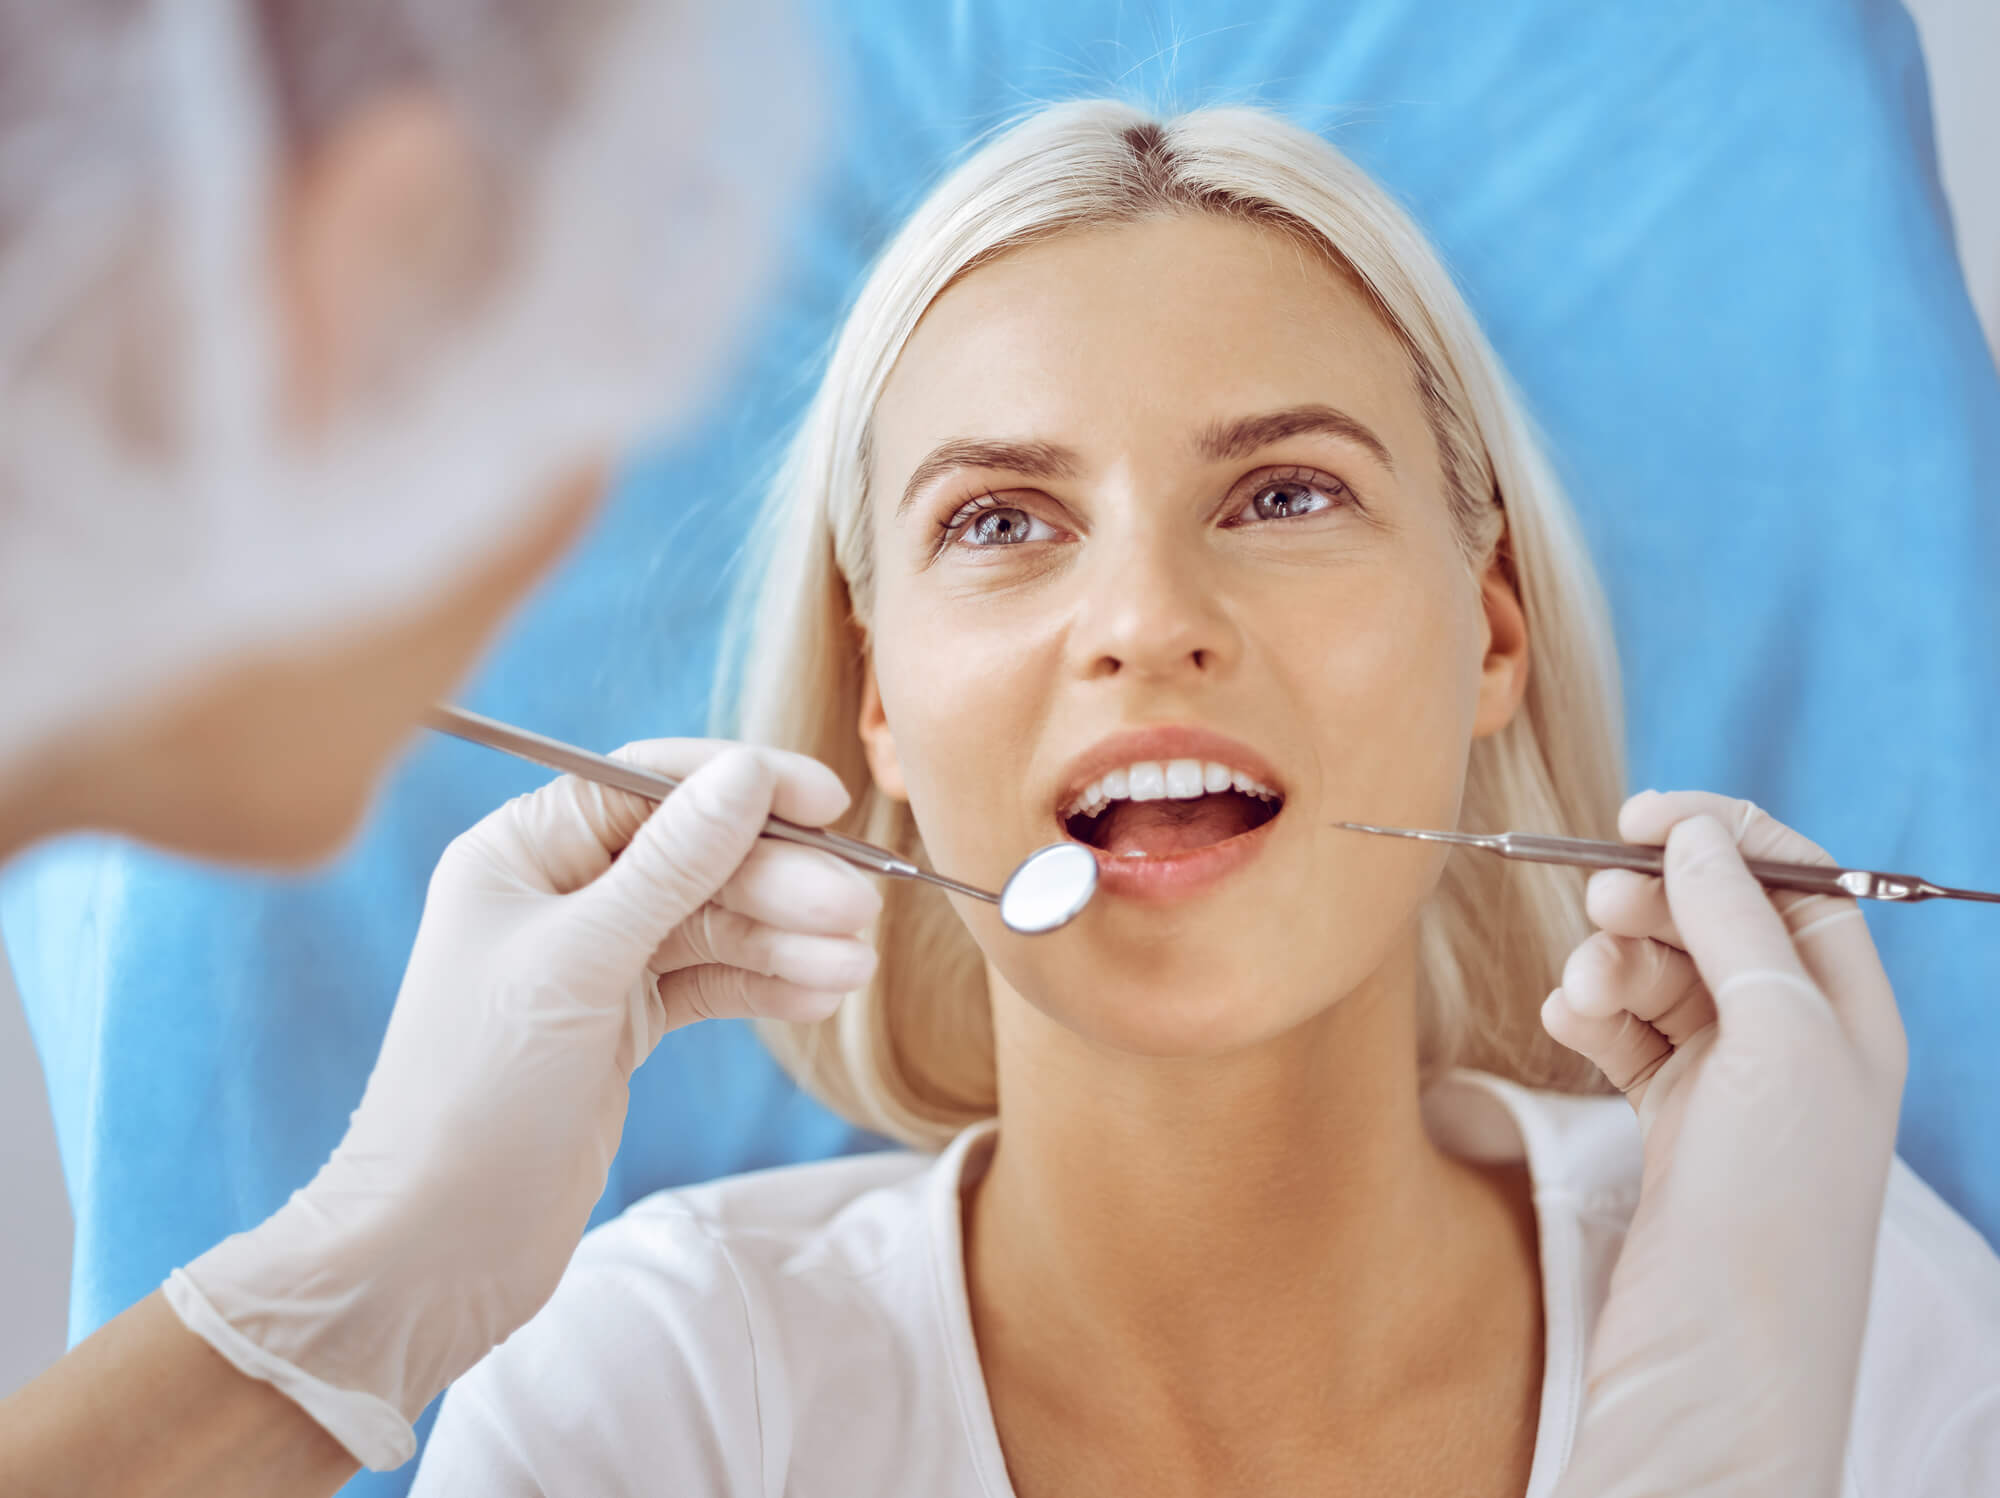 woman-getting-a-Short-Pump-Root-Canal-treatment